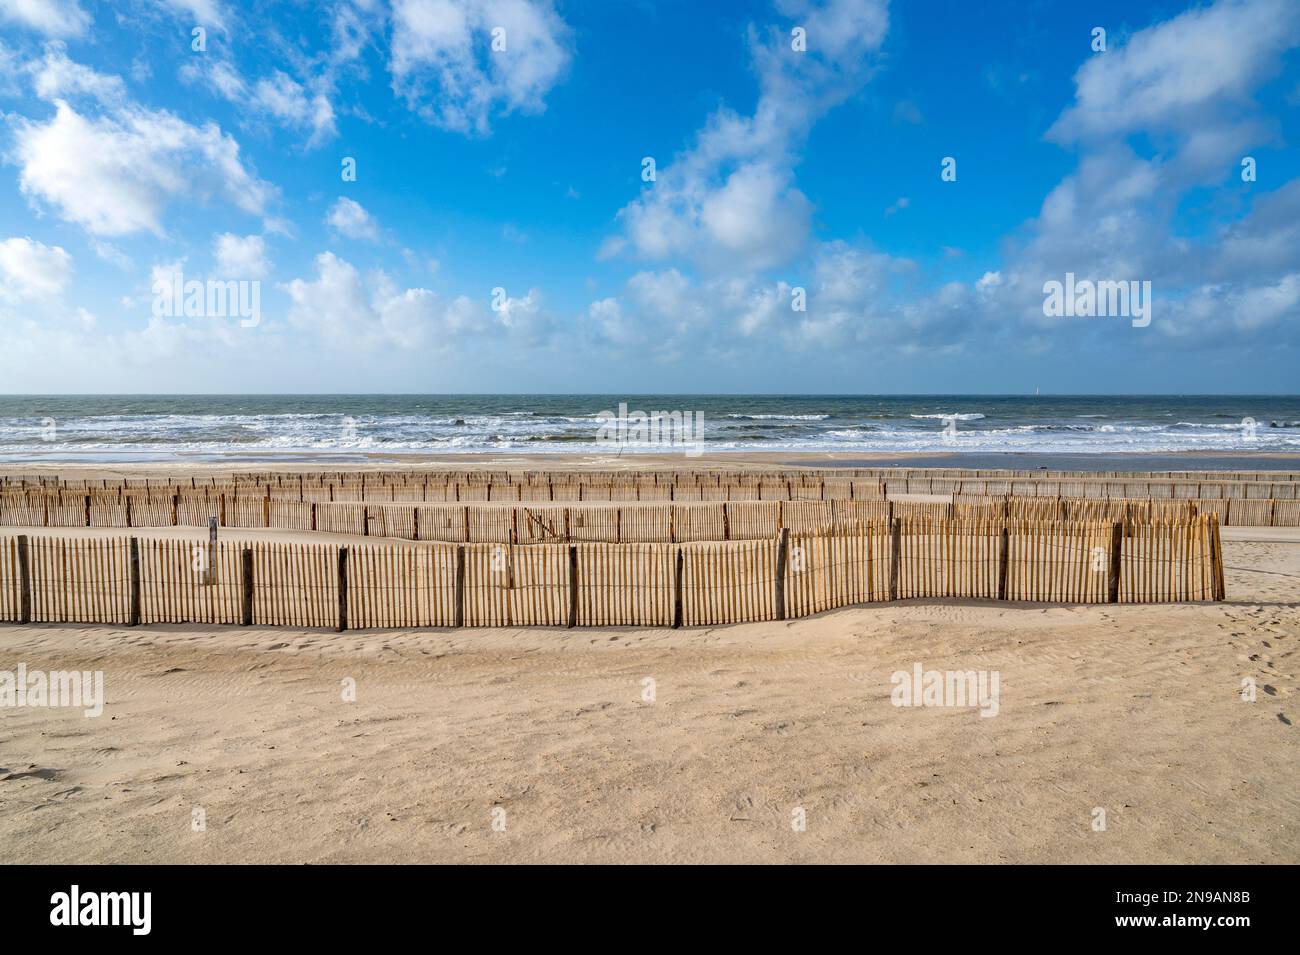 The beach of Soulac-sur-Mer boasts on the French Atlantic coast, France Stock Photo